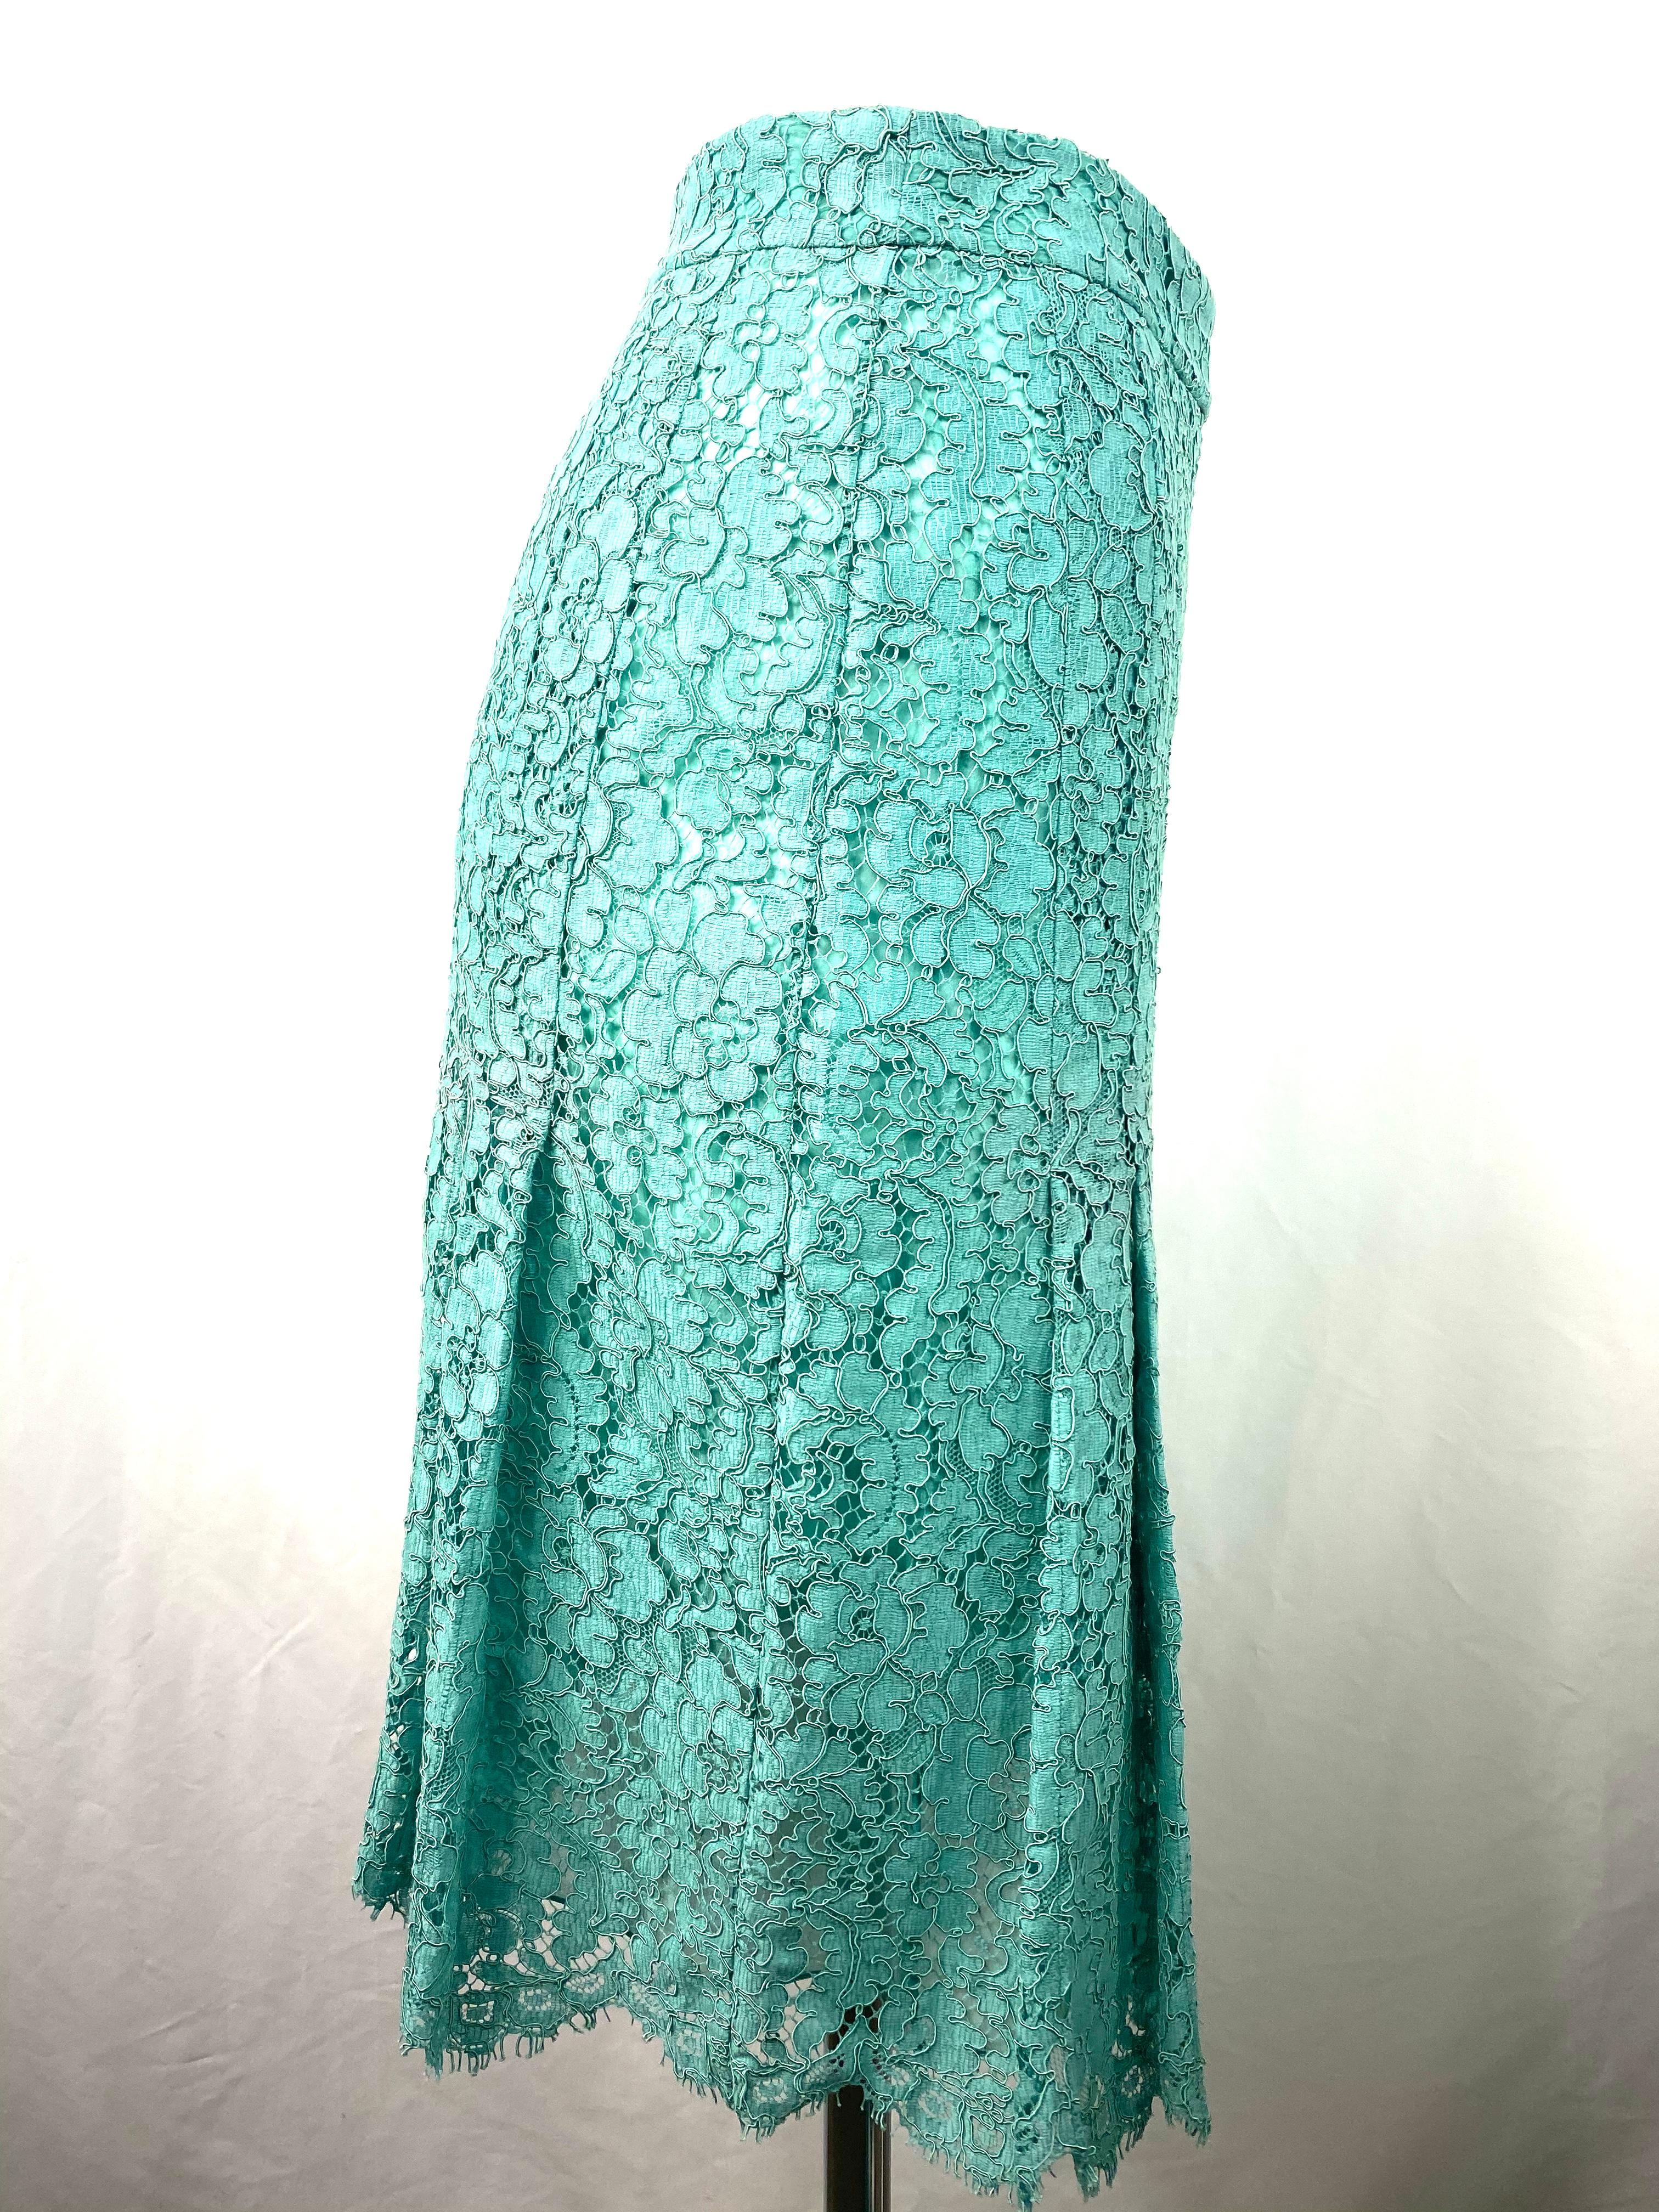 Chanel Turquoise Floral Lace Top and Skirt Set Size 40 For Sale 3